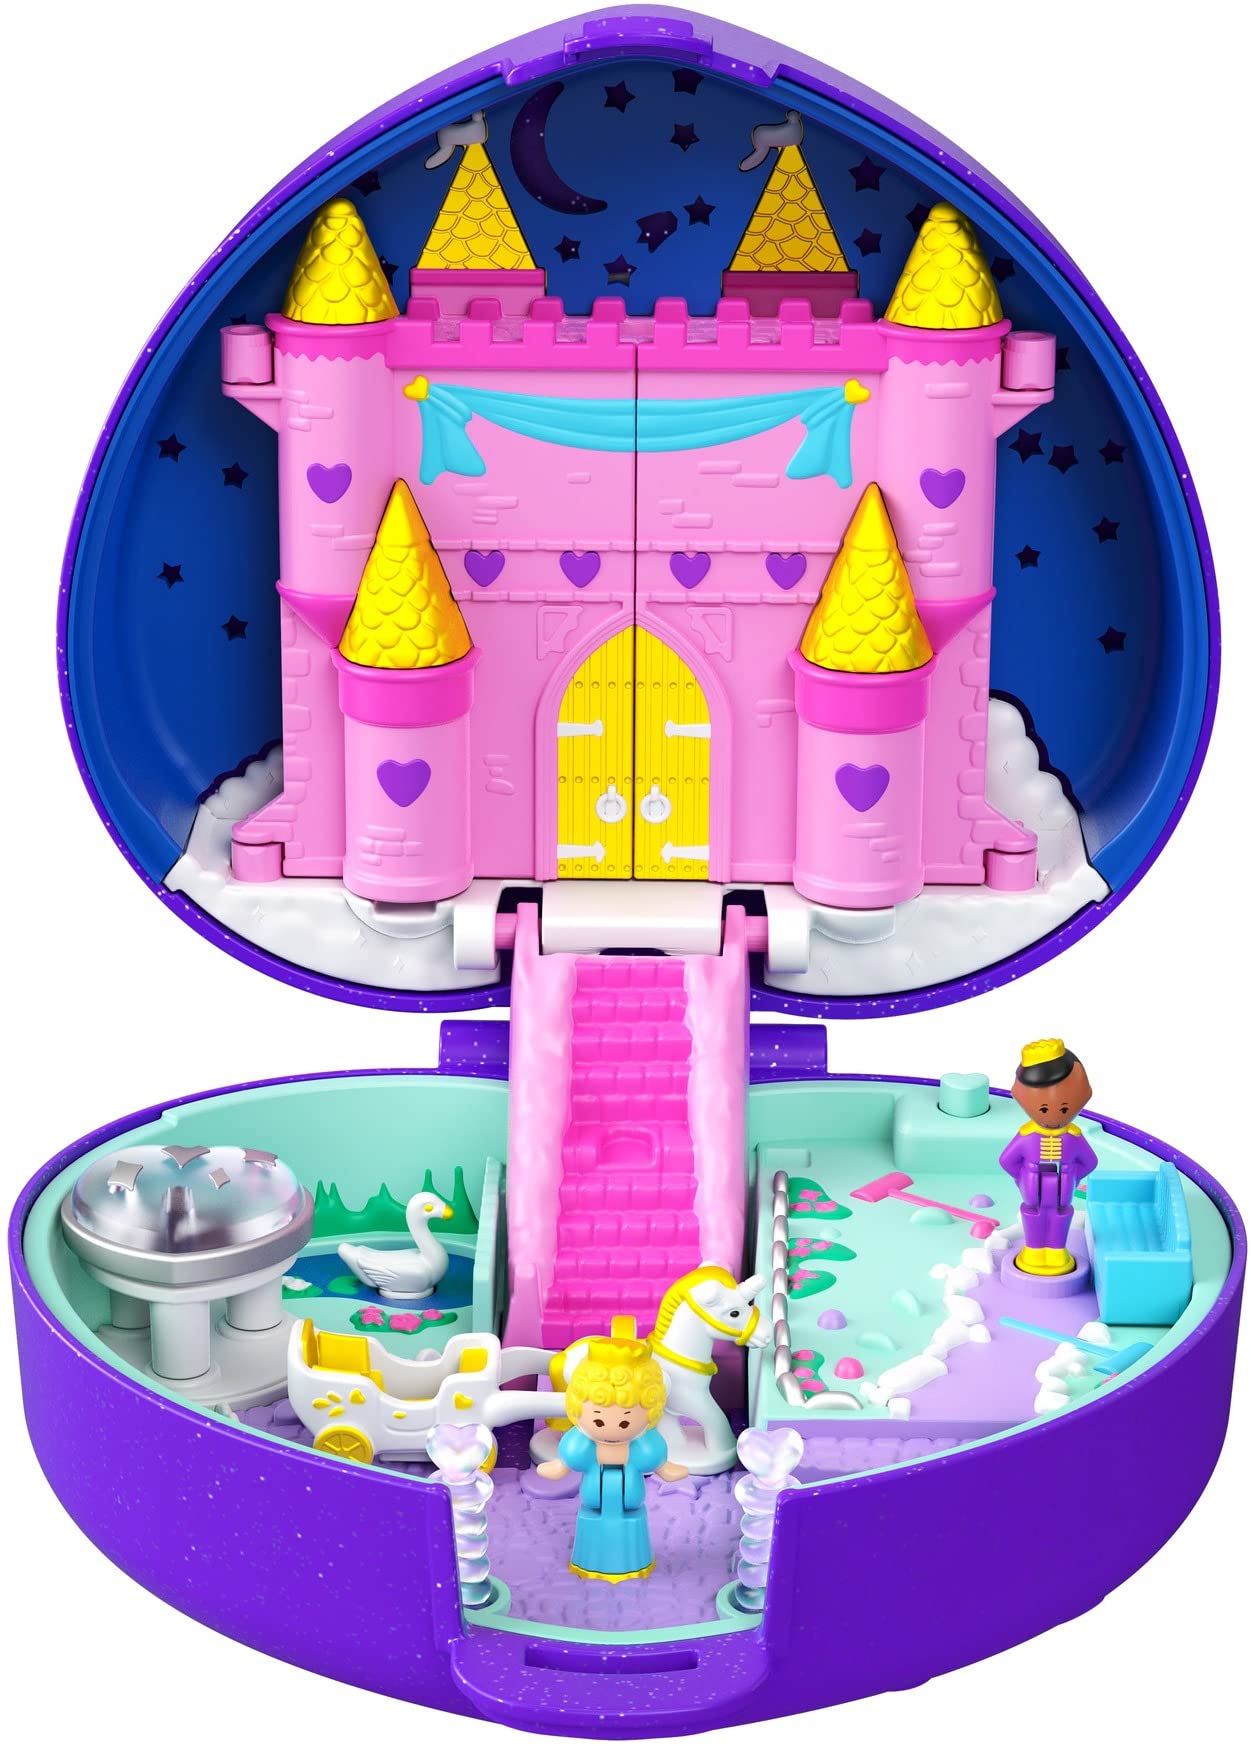 Polly Pocket Keepsake Collection Starlight Castle Compact, Enchanted Castle Theme, Special Box, Polly & Prince Dolls, Carriage, Swan & Unicorn Figures, Collectible Gift for Polly Fans